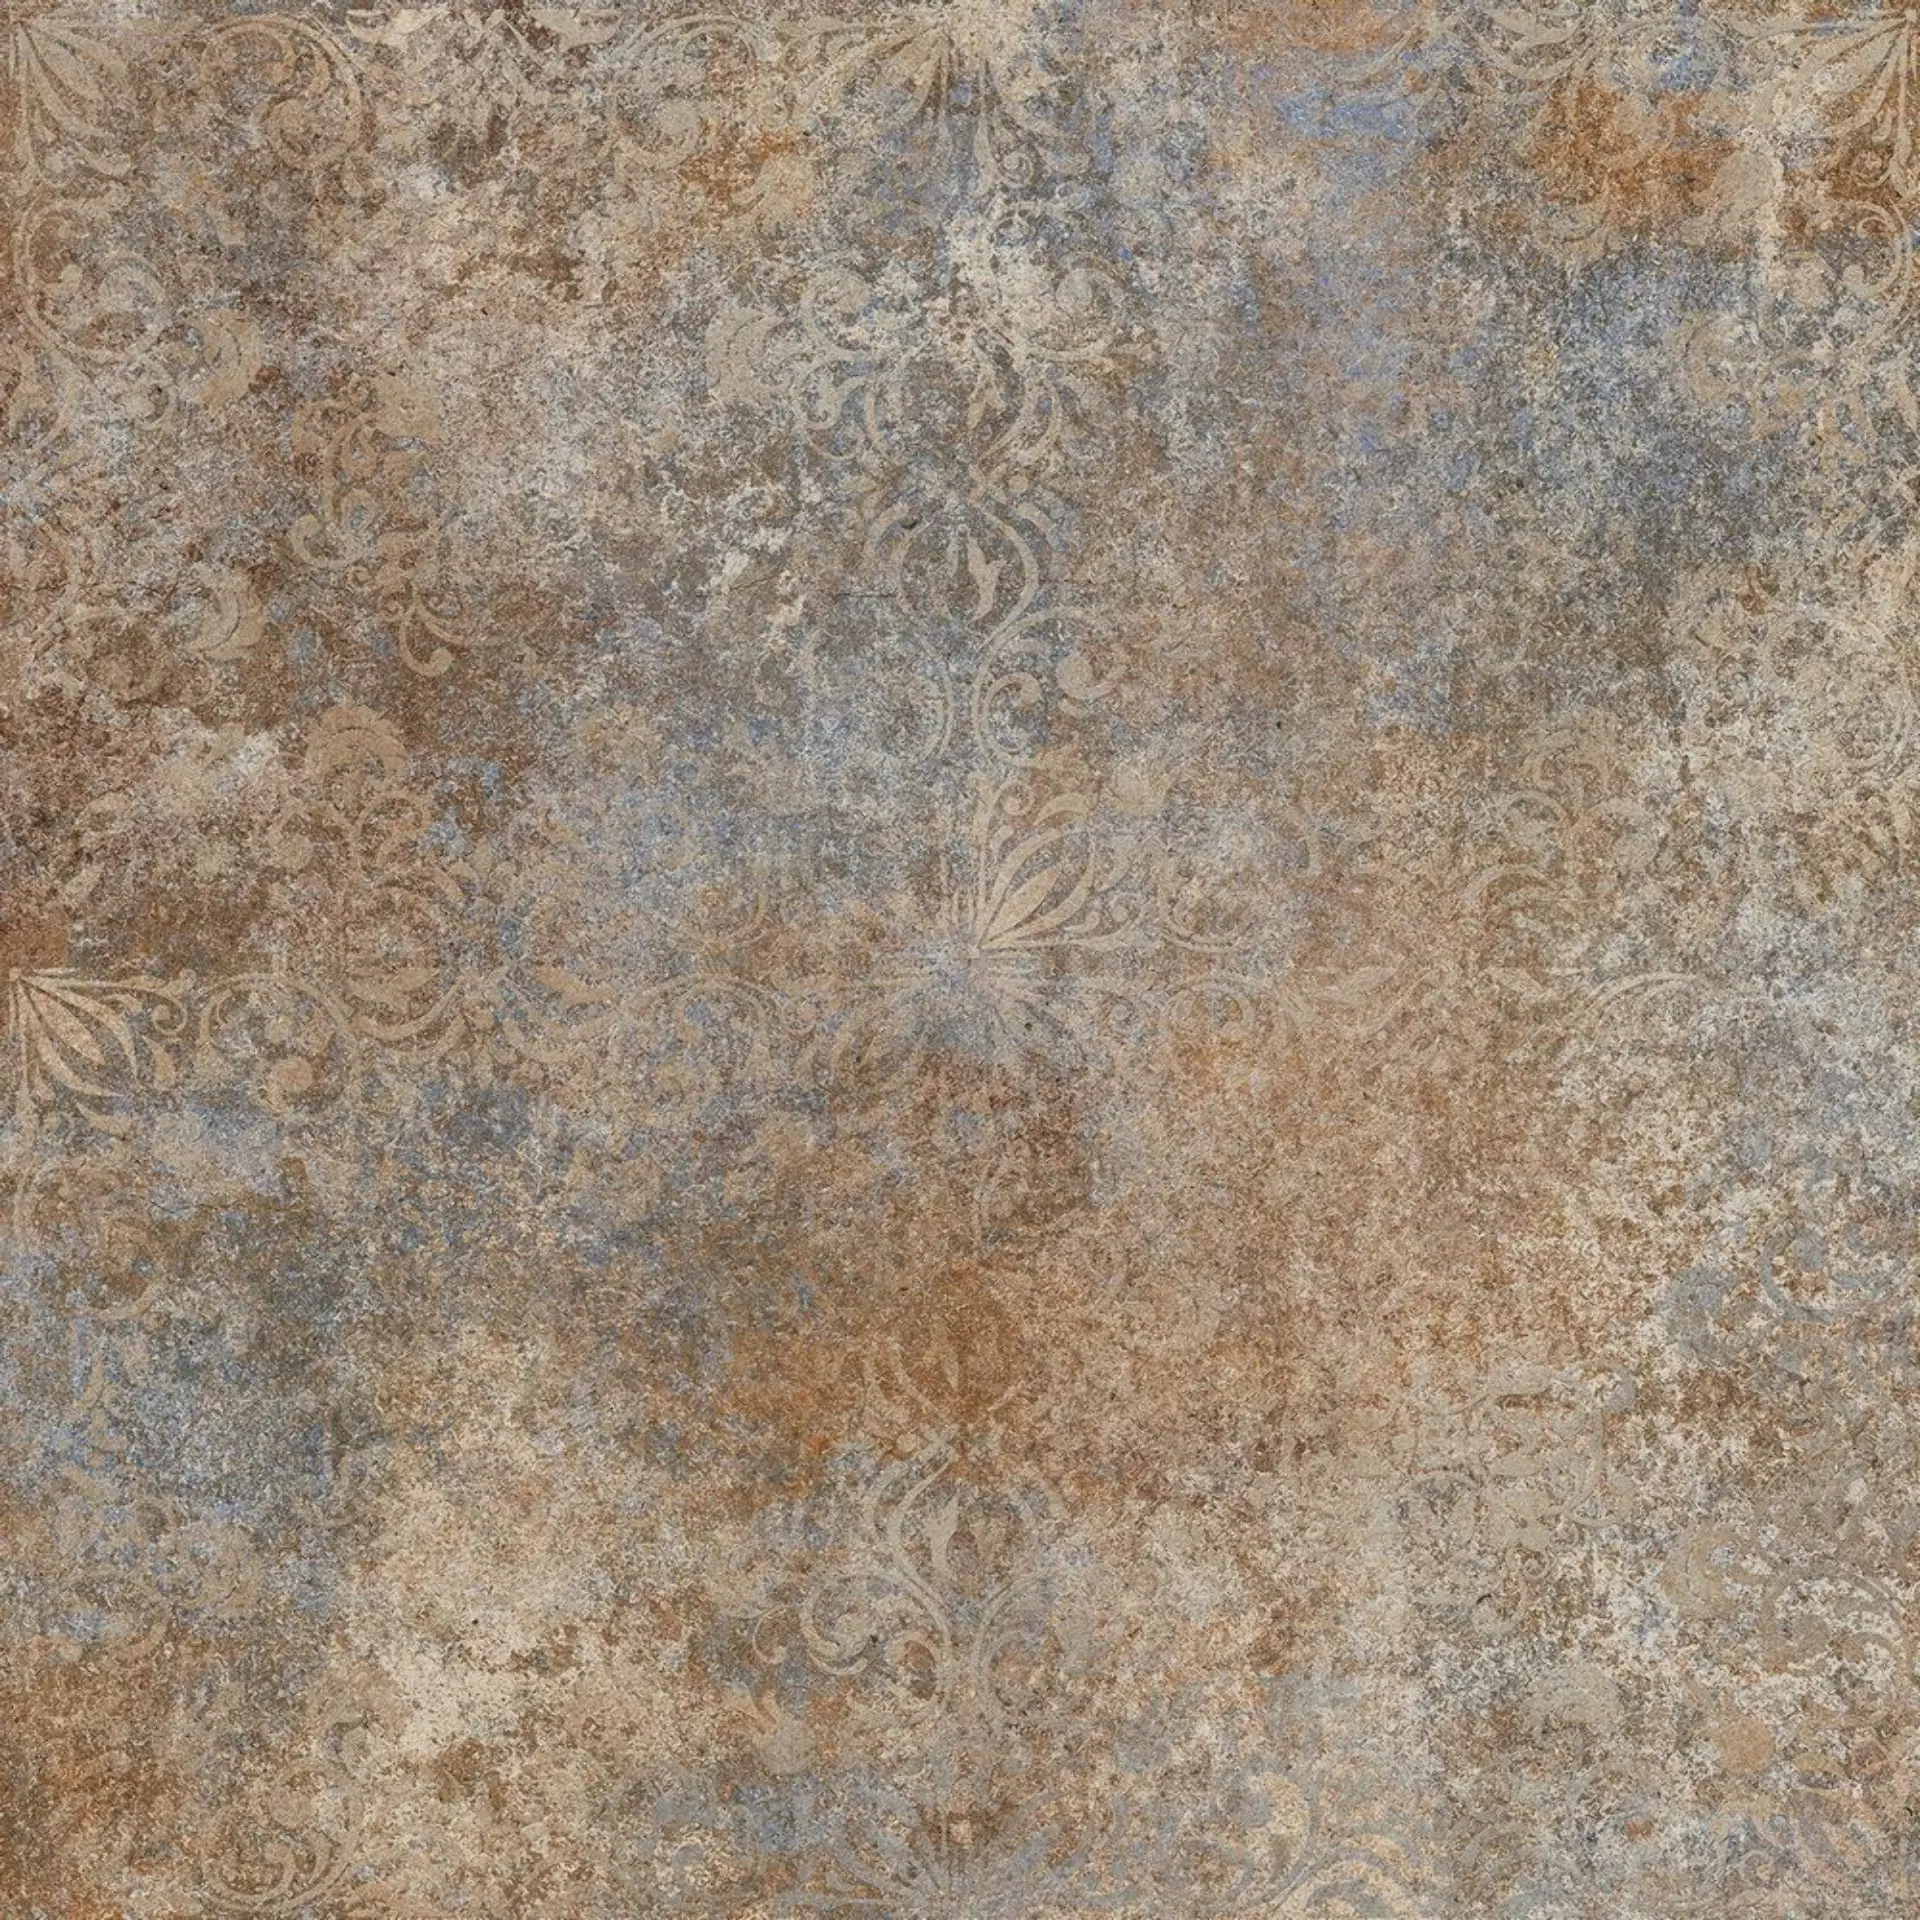 Century Glam Canvas Naturale Decor 0113750 80x80cm rectified 9mm